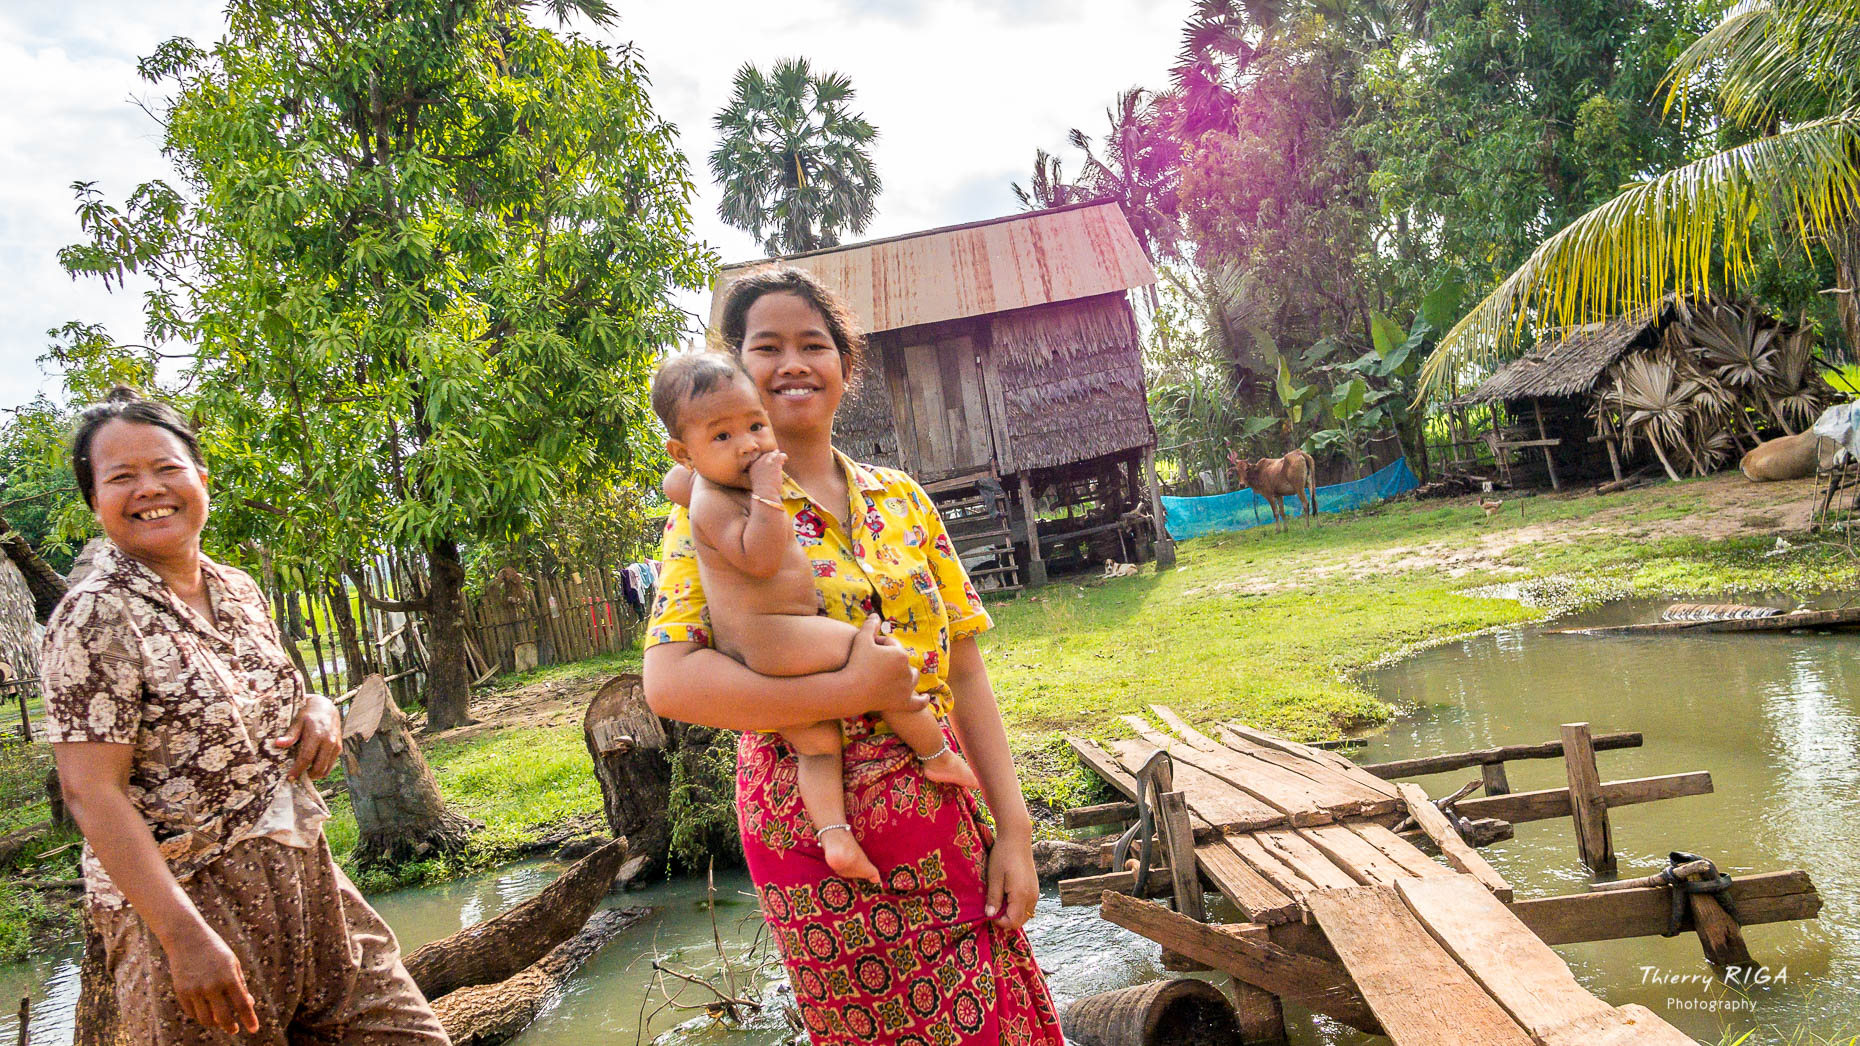 smiling women and baby in cambodian village, Thierry Riga, Angkor Photography